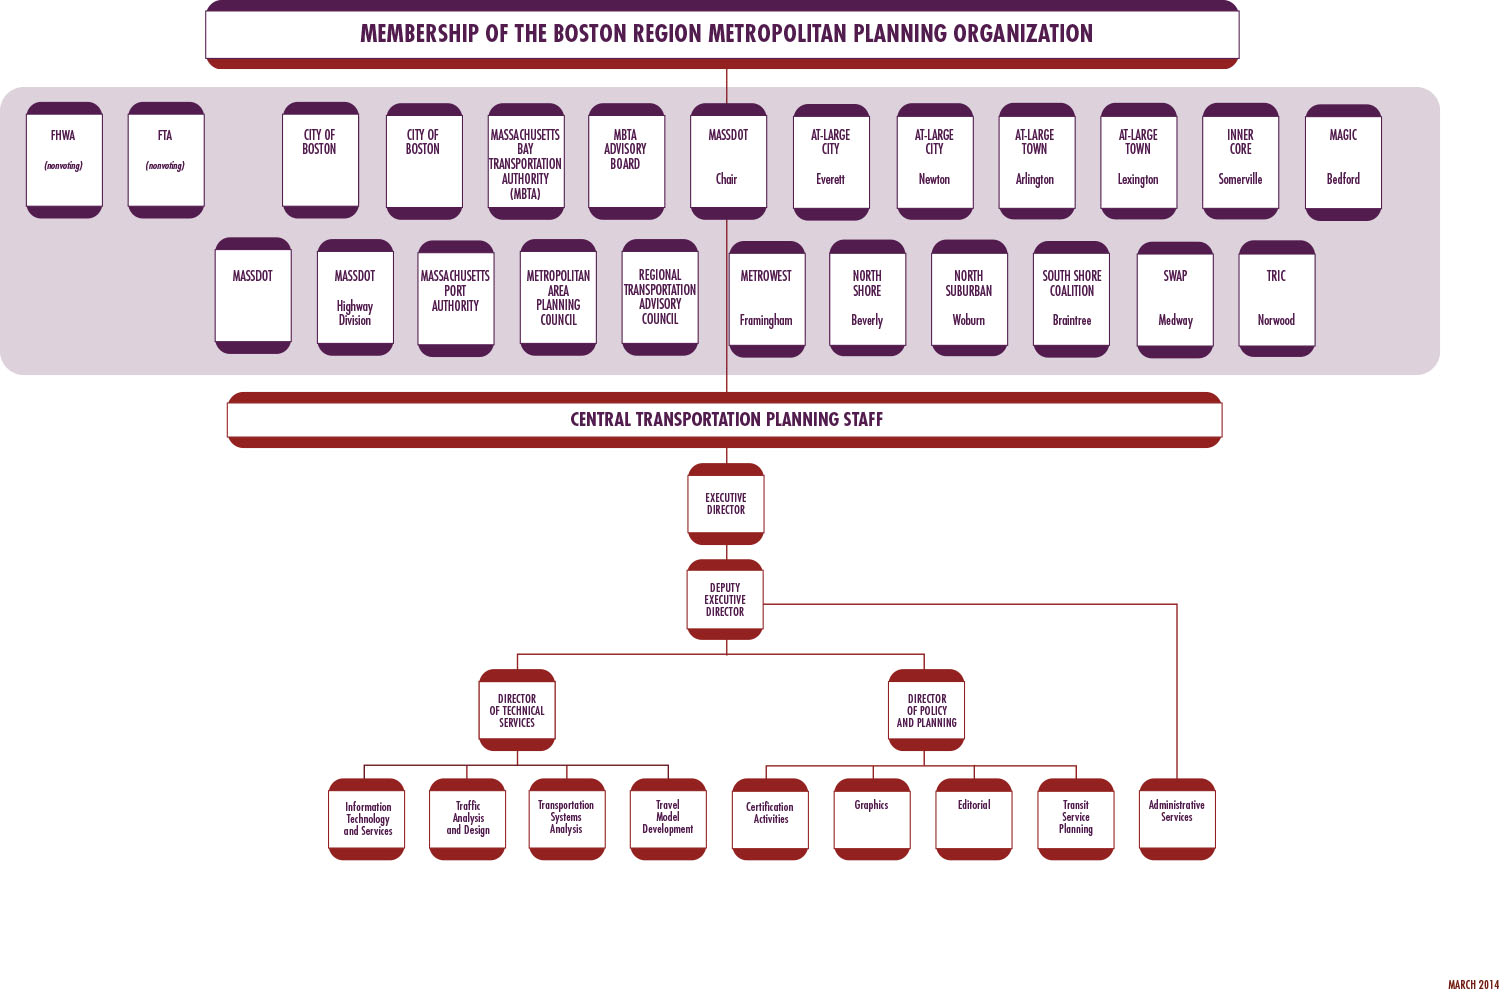 Figure 1-1: Organization Chart 
This figure shows the membership of the Boston Region Metropolitan Planning Organization, as described in the chapter, along with the organizational chart of the Central Transportation Planning Staff (CTPS) below.
